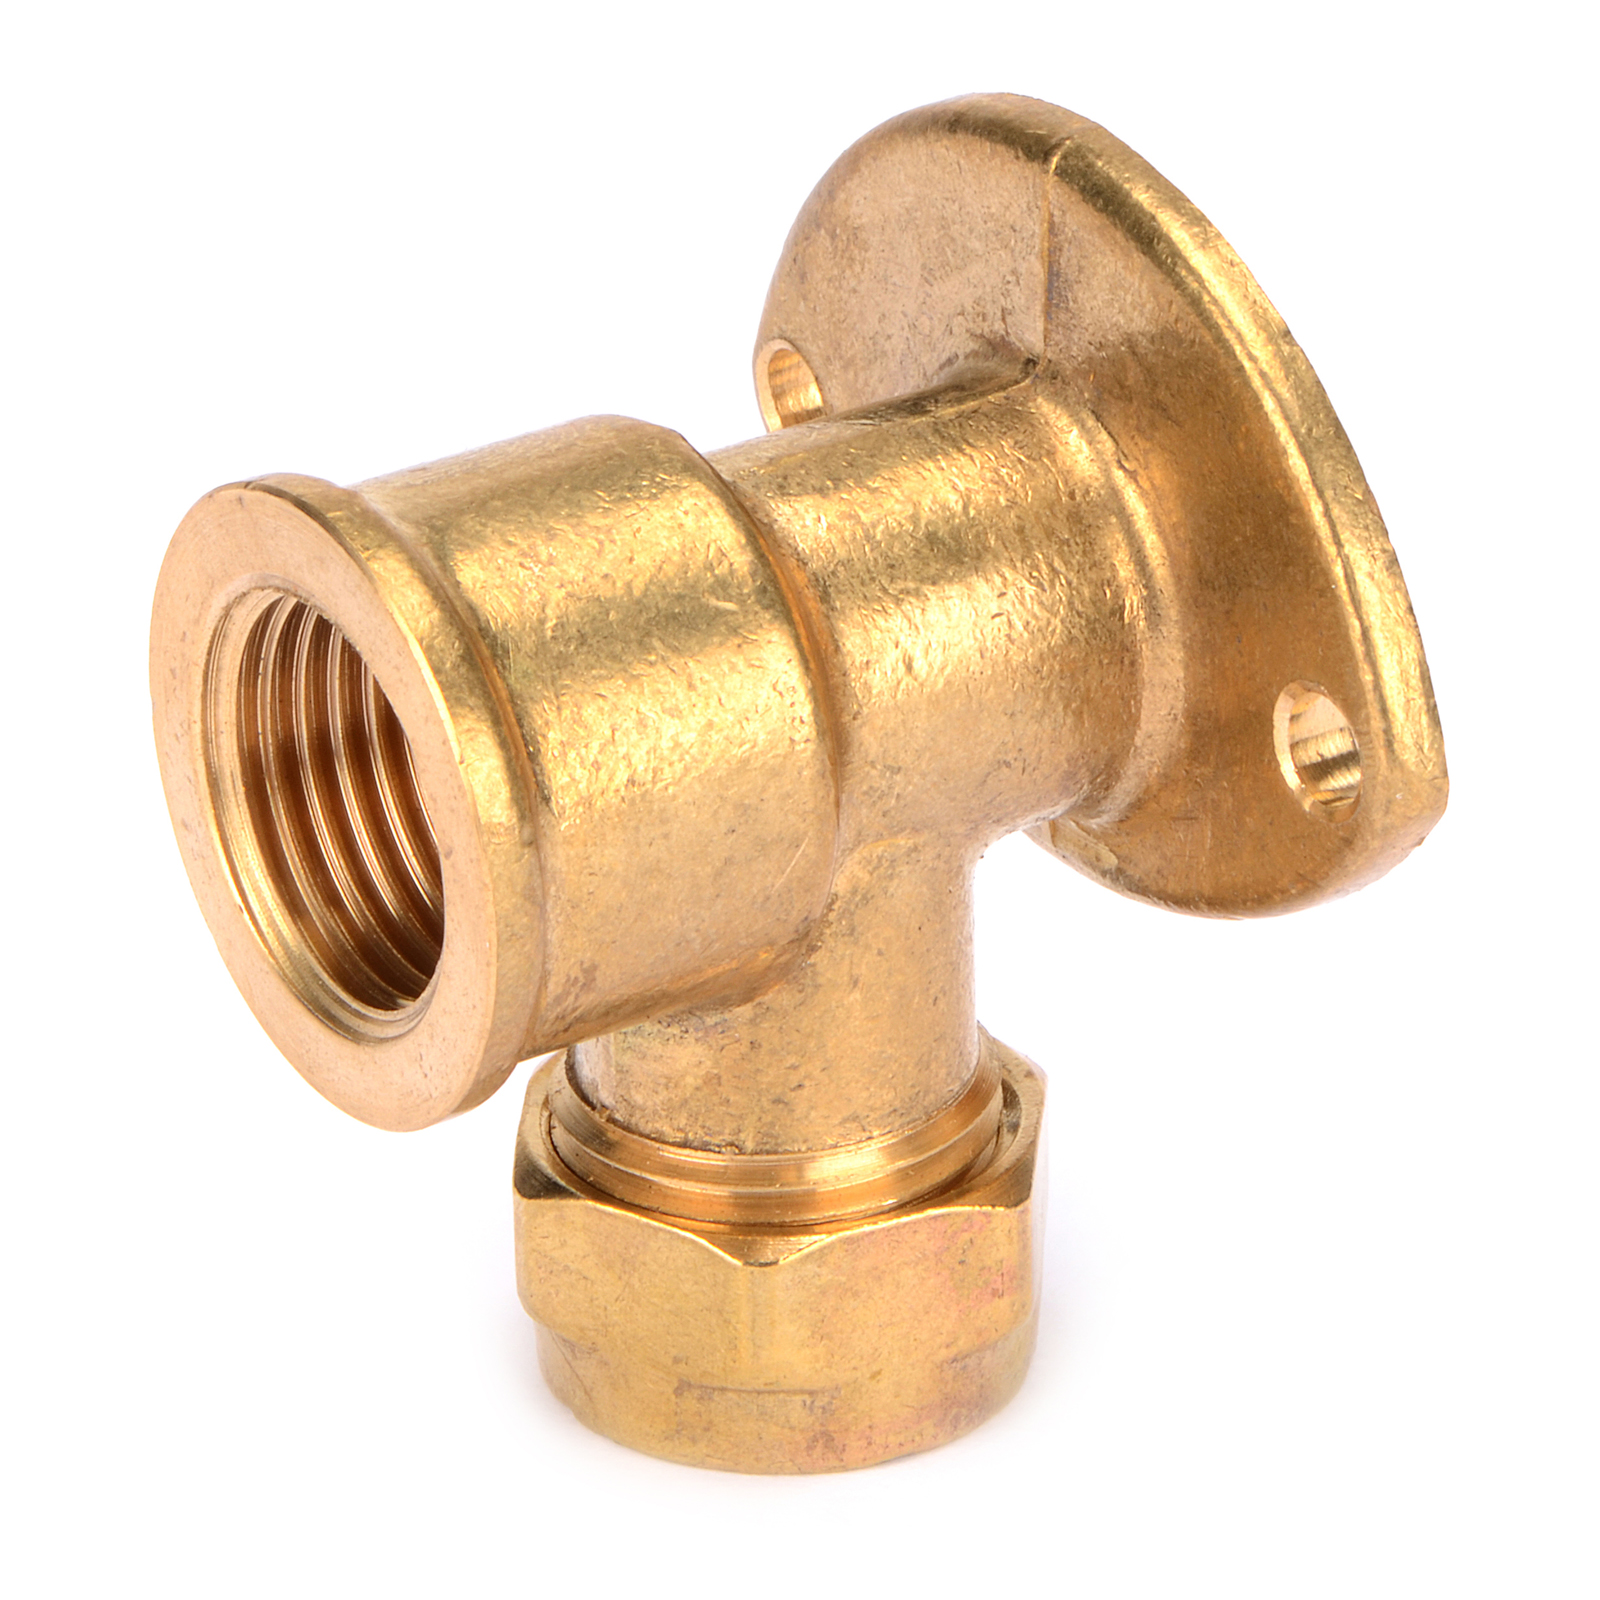 Instantor Compression fittings - Breson Fittings Ltd